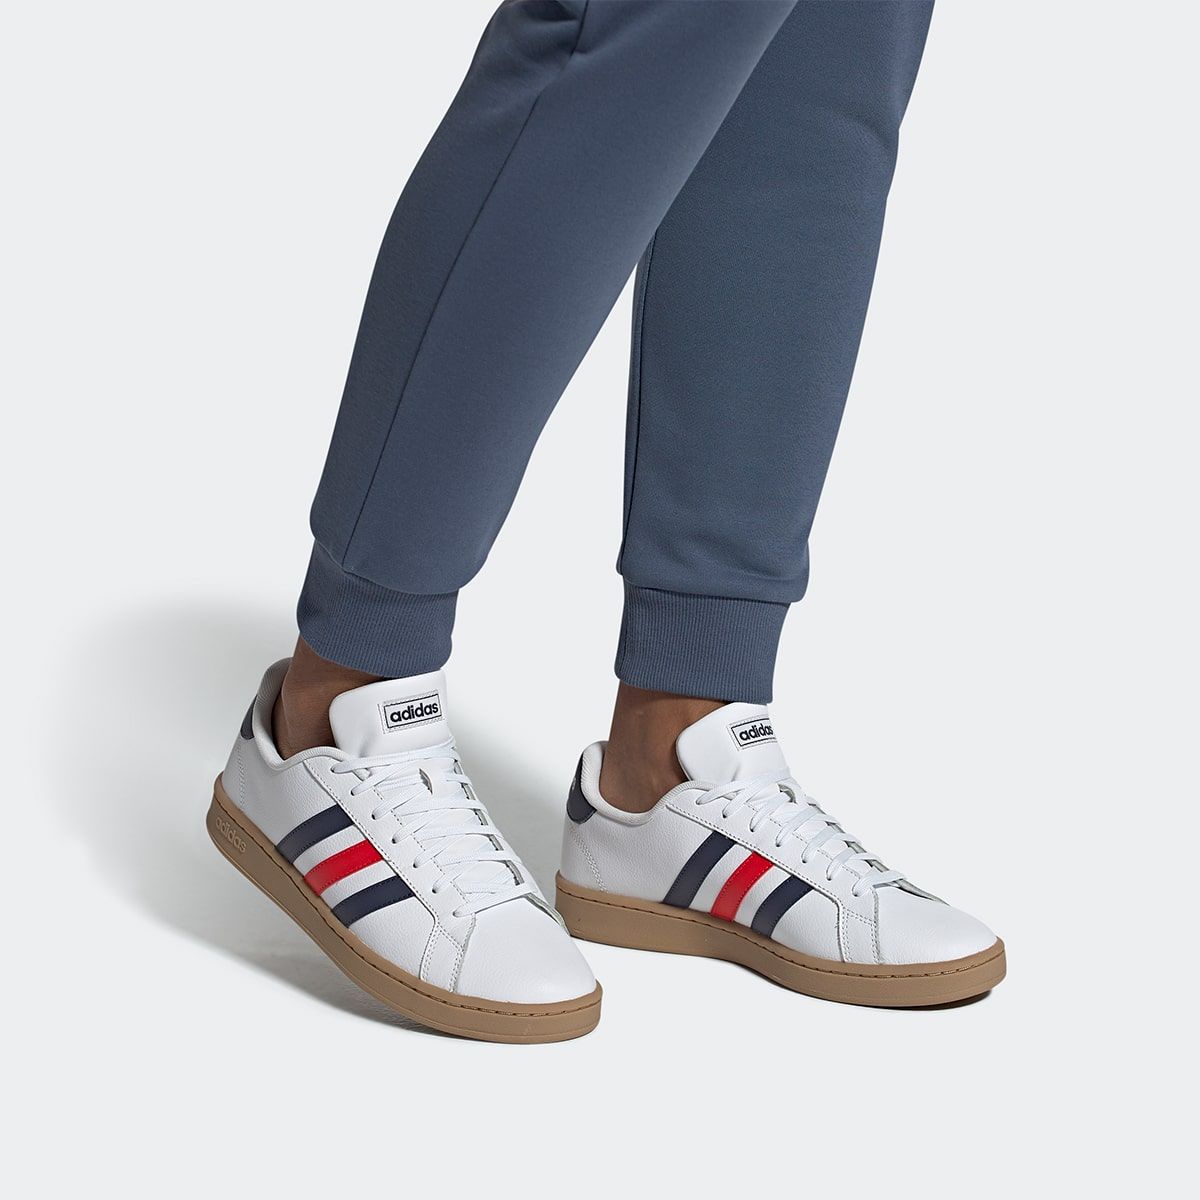 adidas grand court red white blue